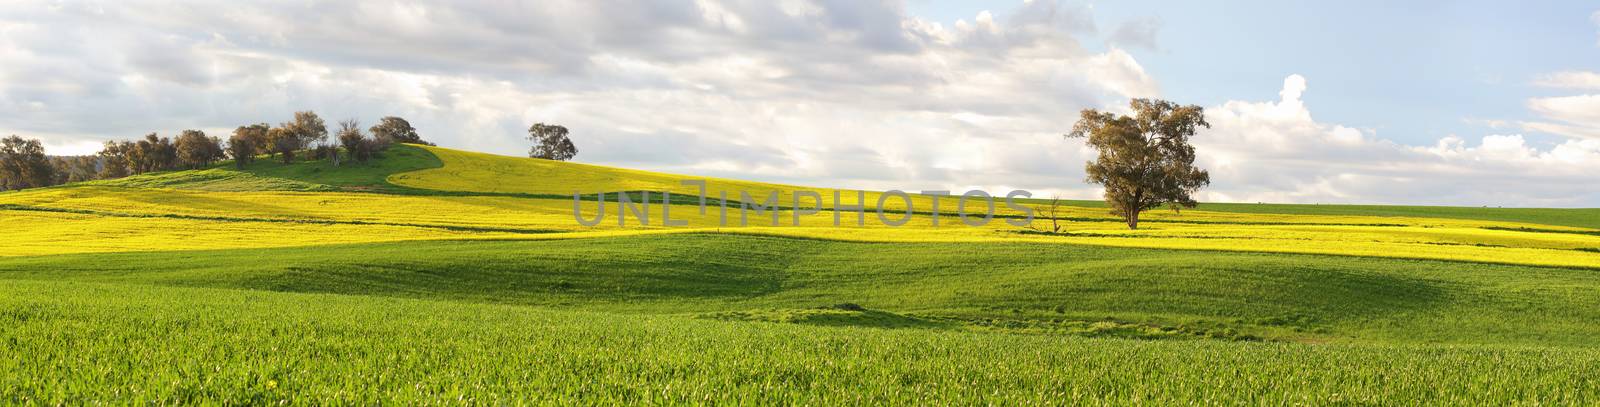 Agricultural fields of canola and pastures in springtime by lovleah